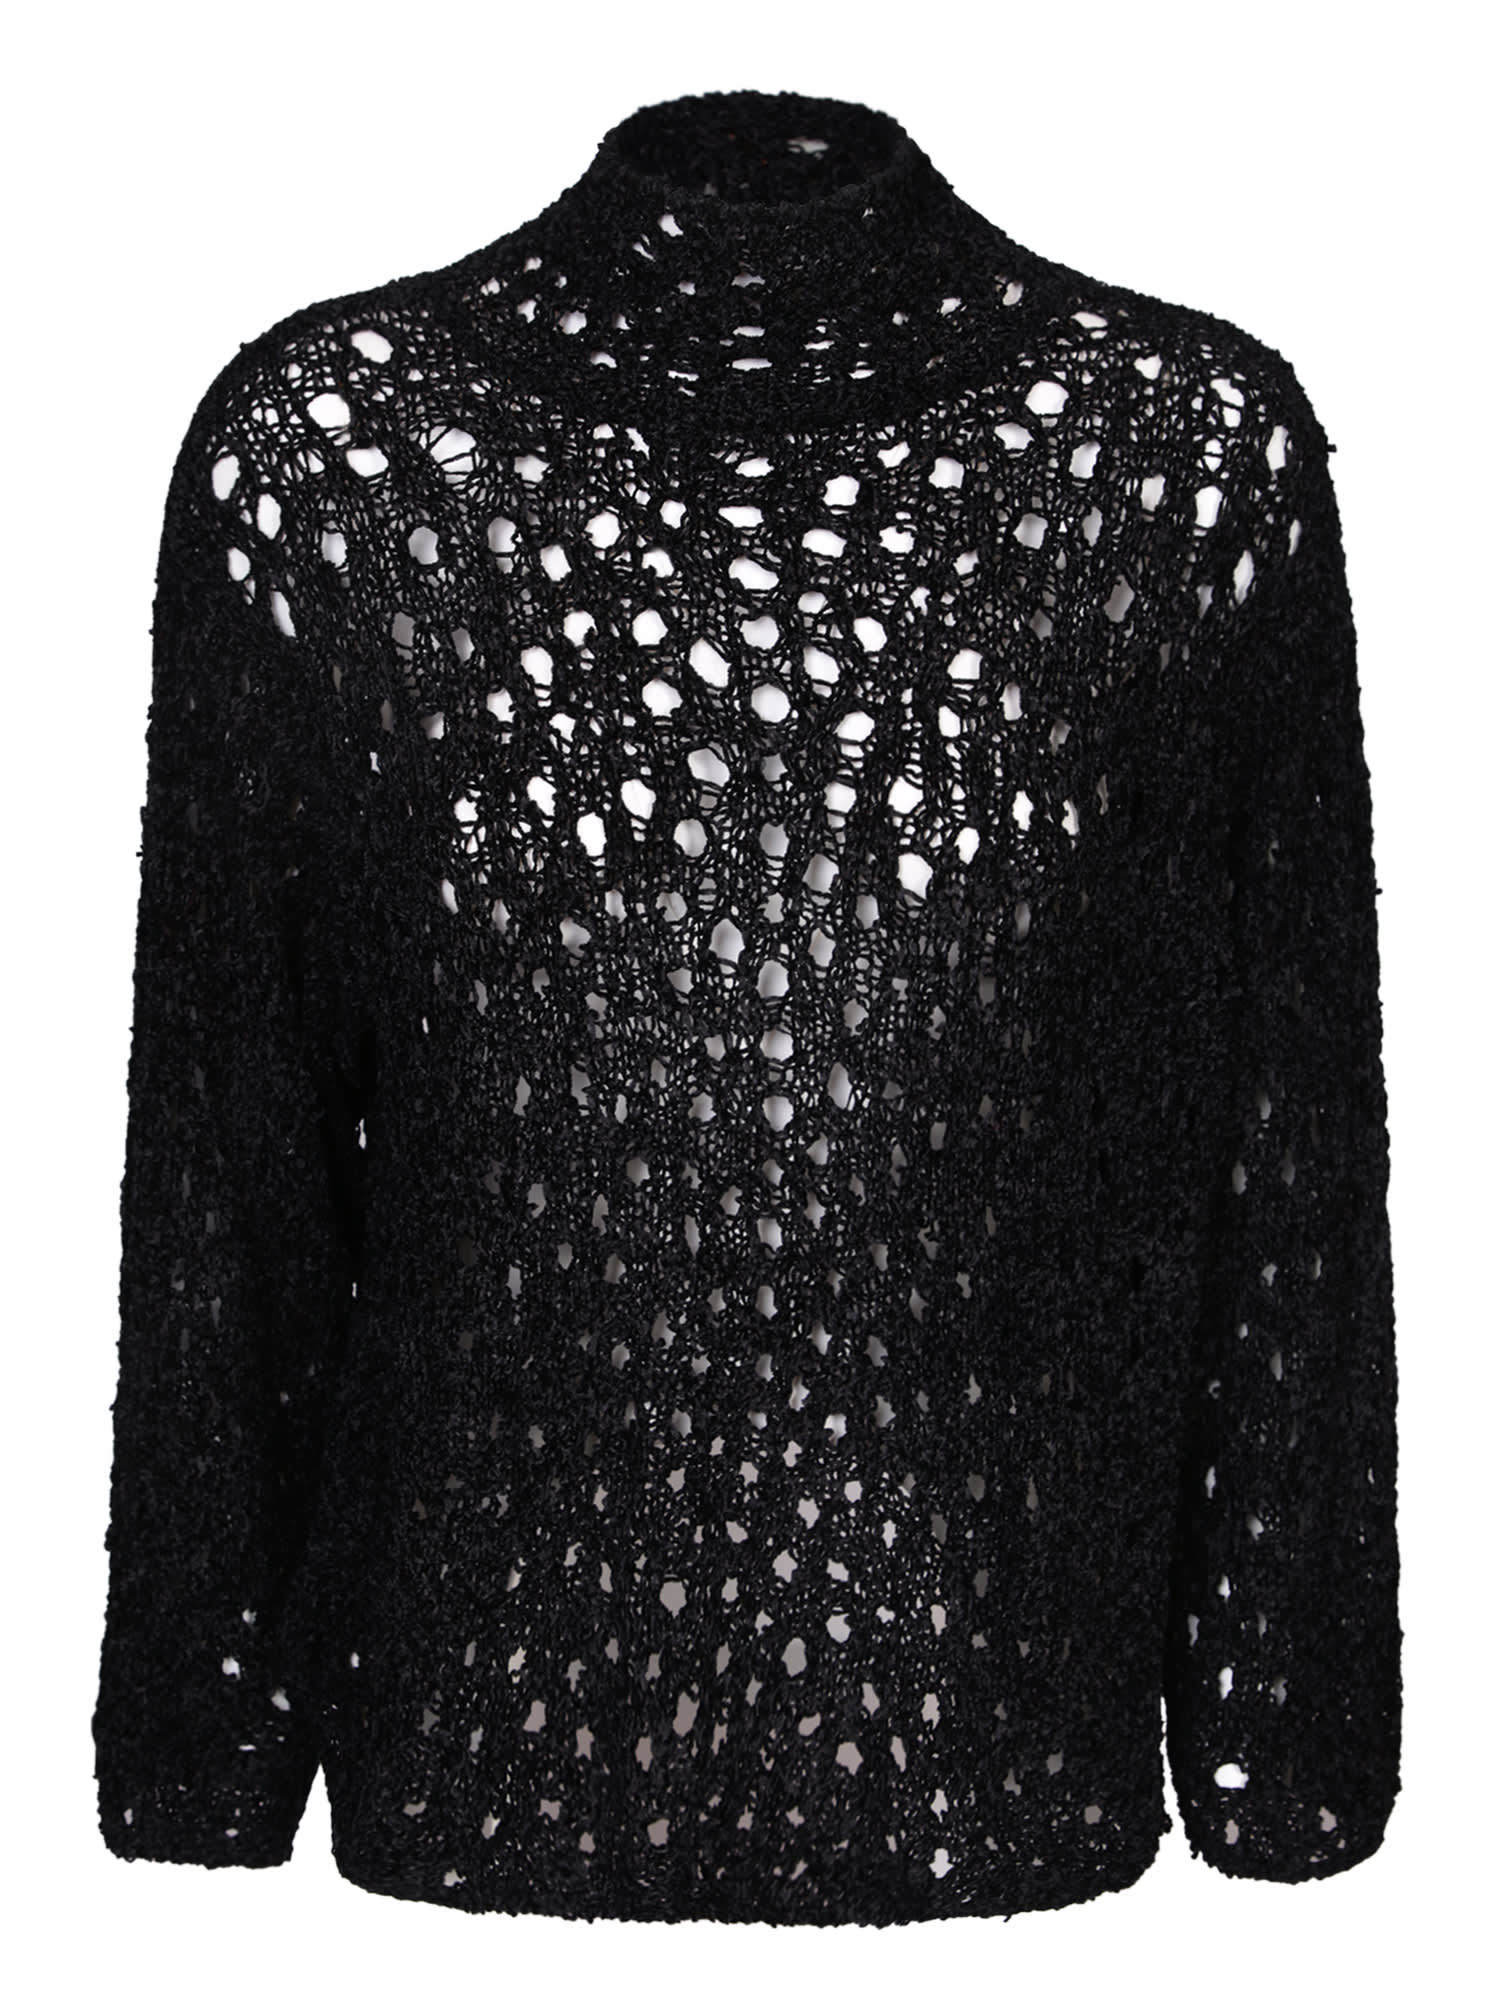 Perforated Knit Sweater Black